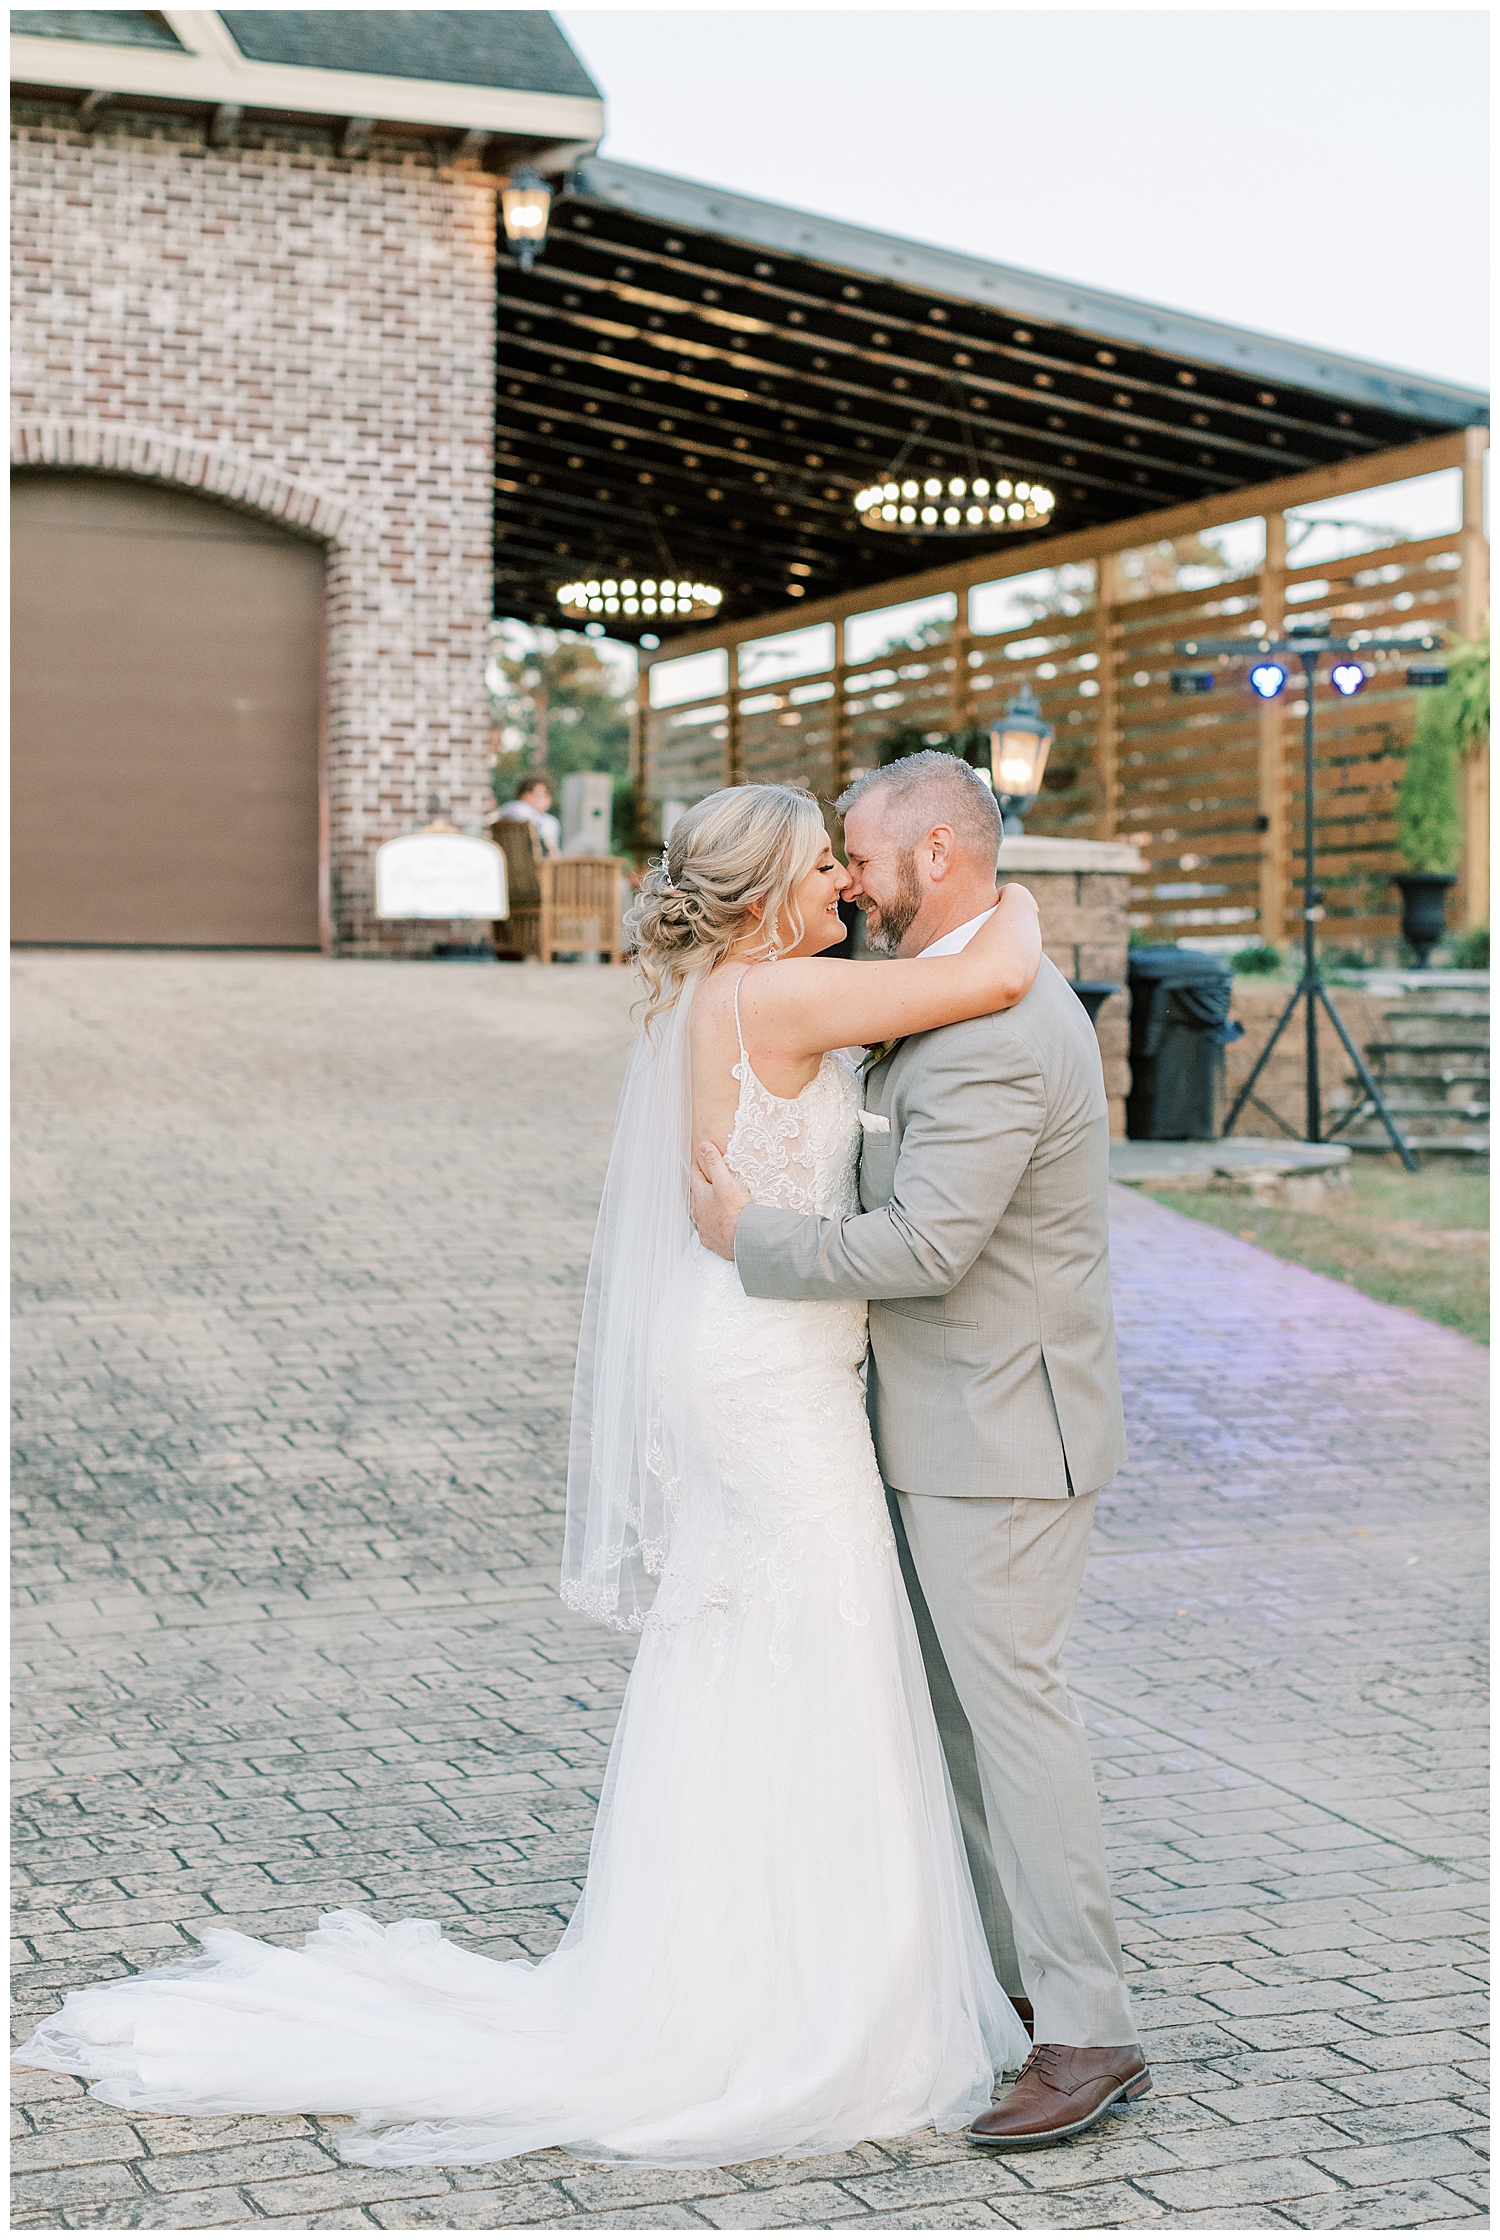 A husband and wife share their first dance at Three Lakes Manor in Poplarville.